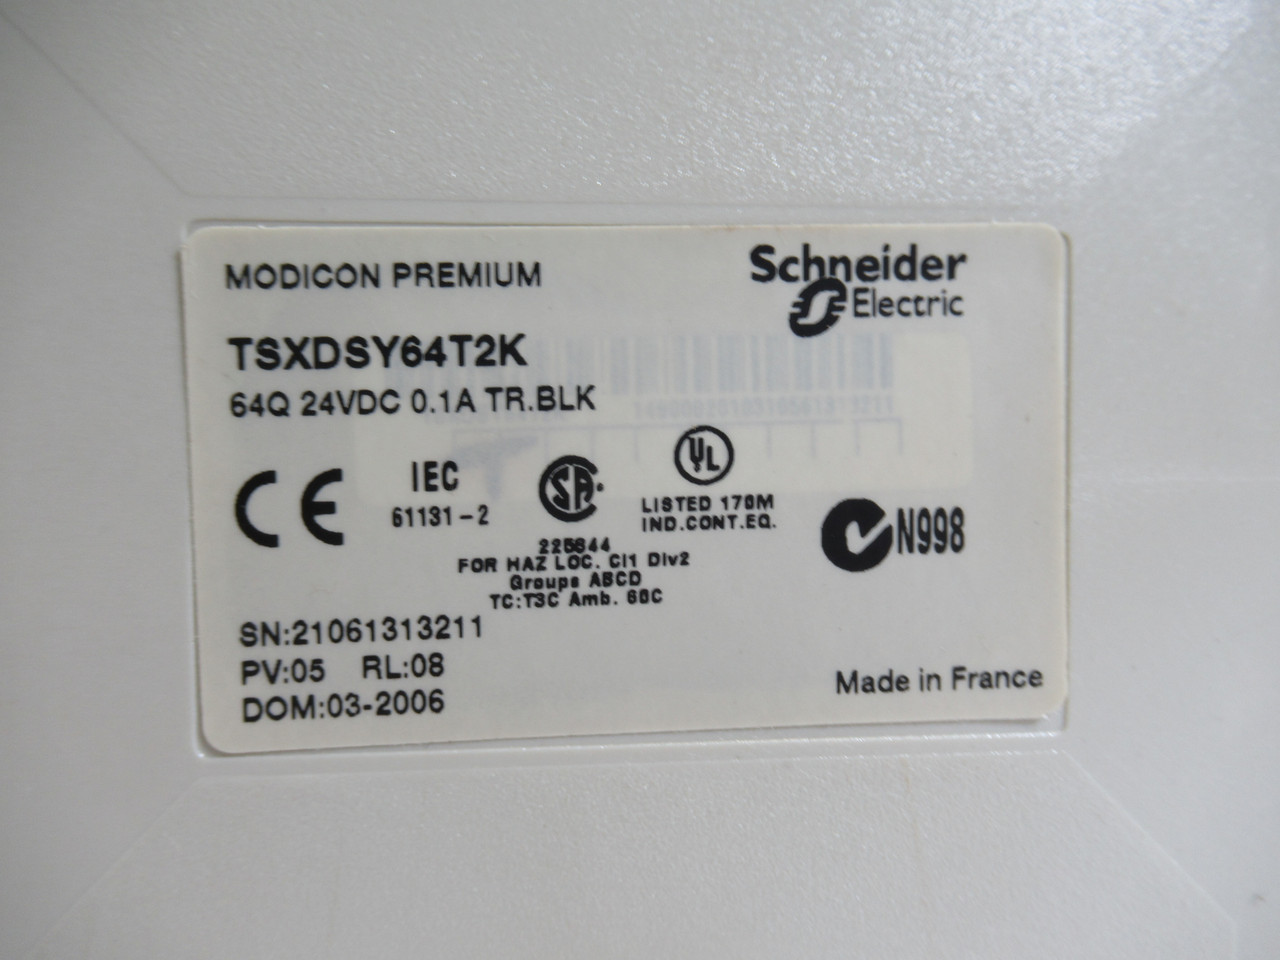 Schneider TSXDSY64T2K Terminal Module 24VDC 0.1A *No Terminal Covers* USED